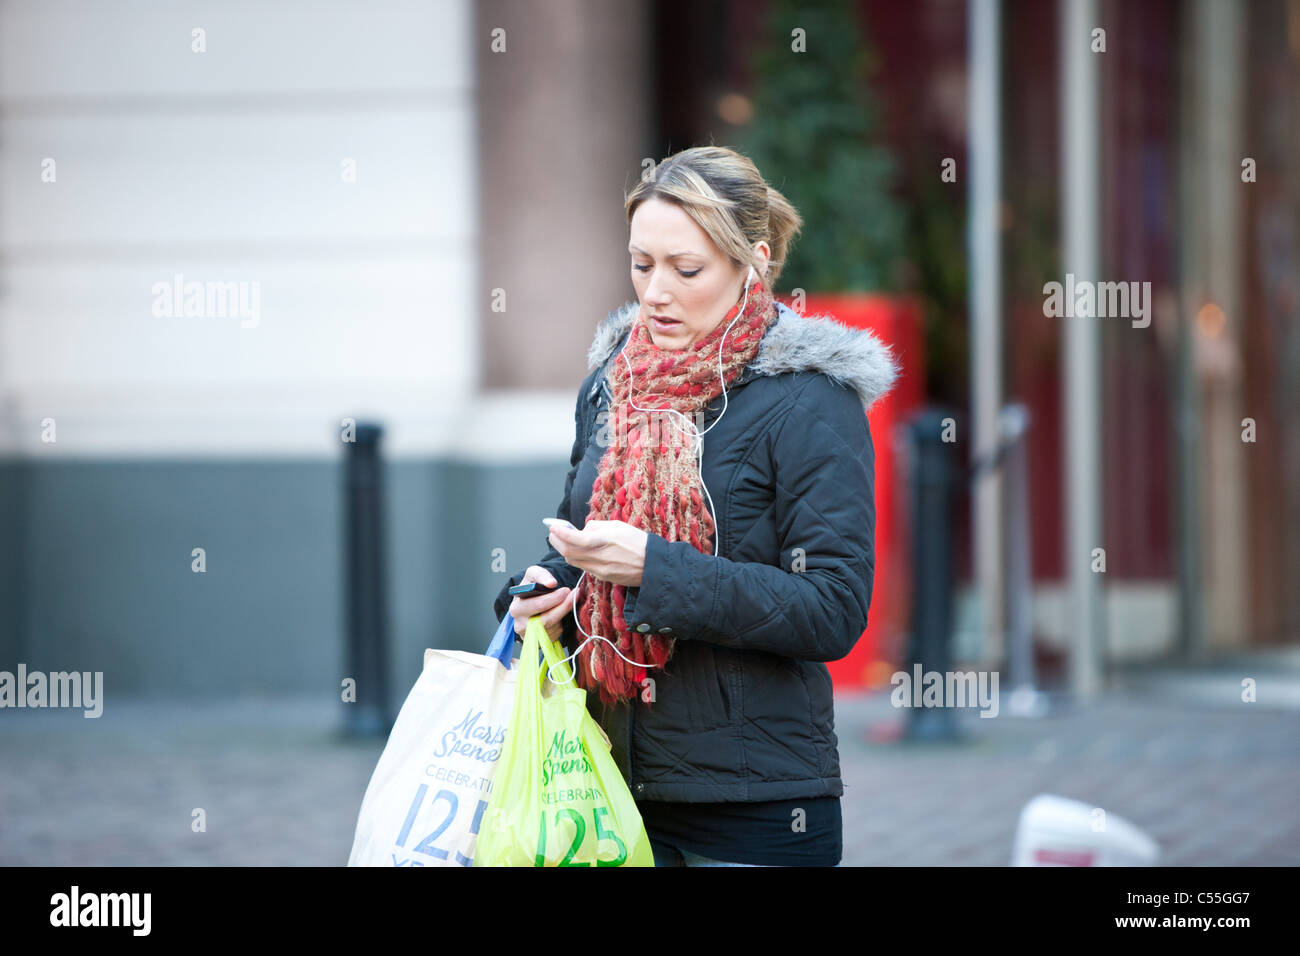 woman on mp3 player carrying bags Stock Photo